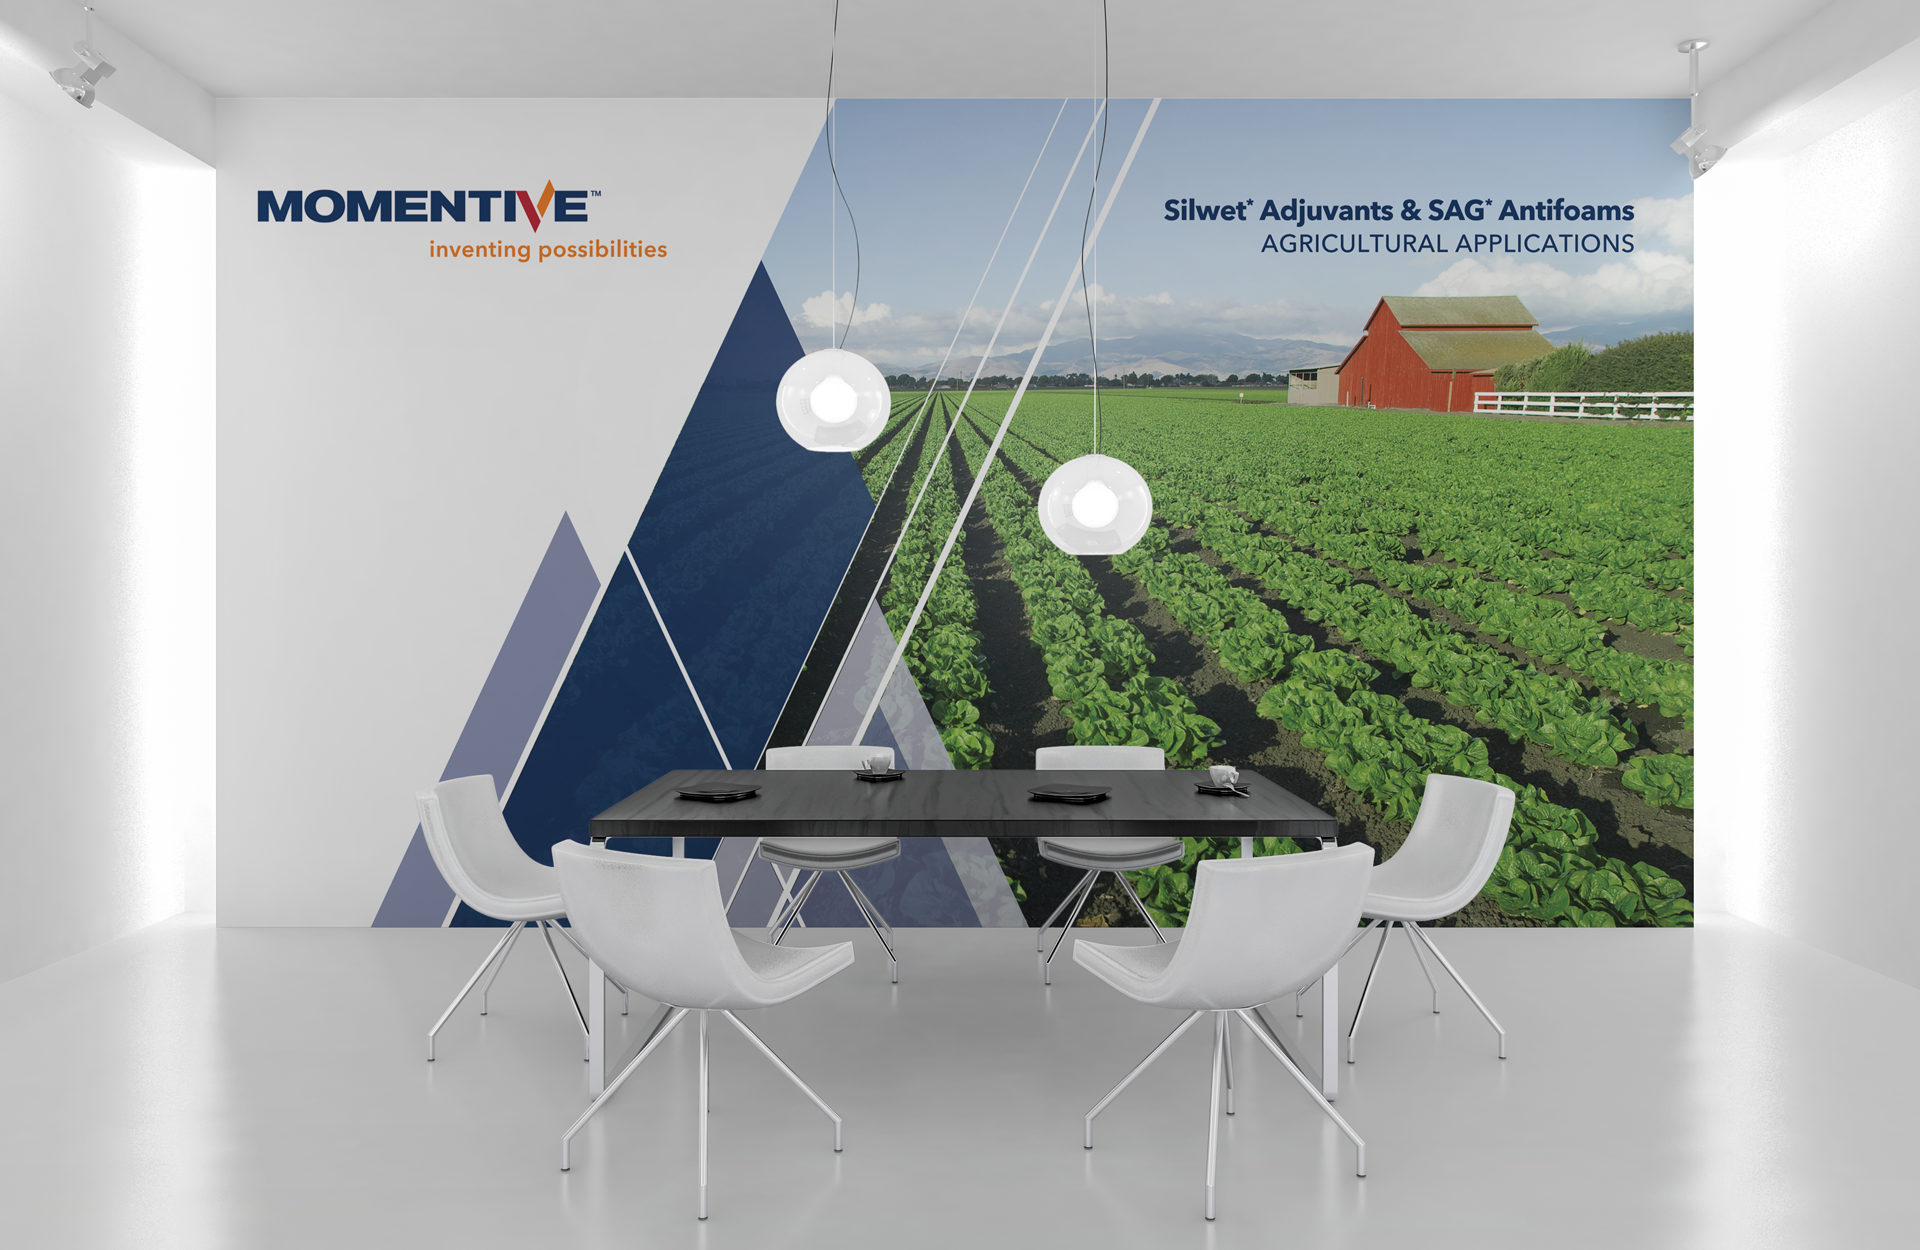 Elwood design, elwoodesign, Momentive, poster design, GE, GE Silicone, Wall Graphics